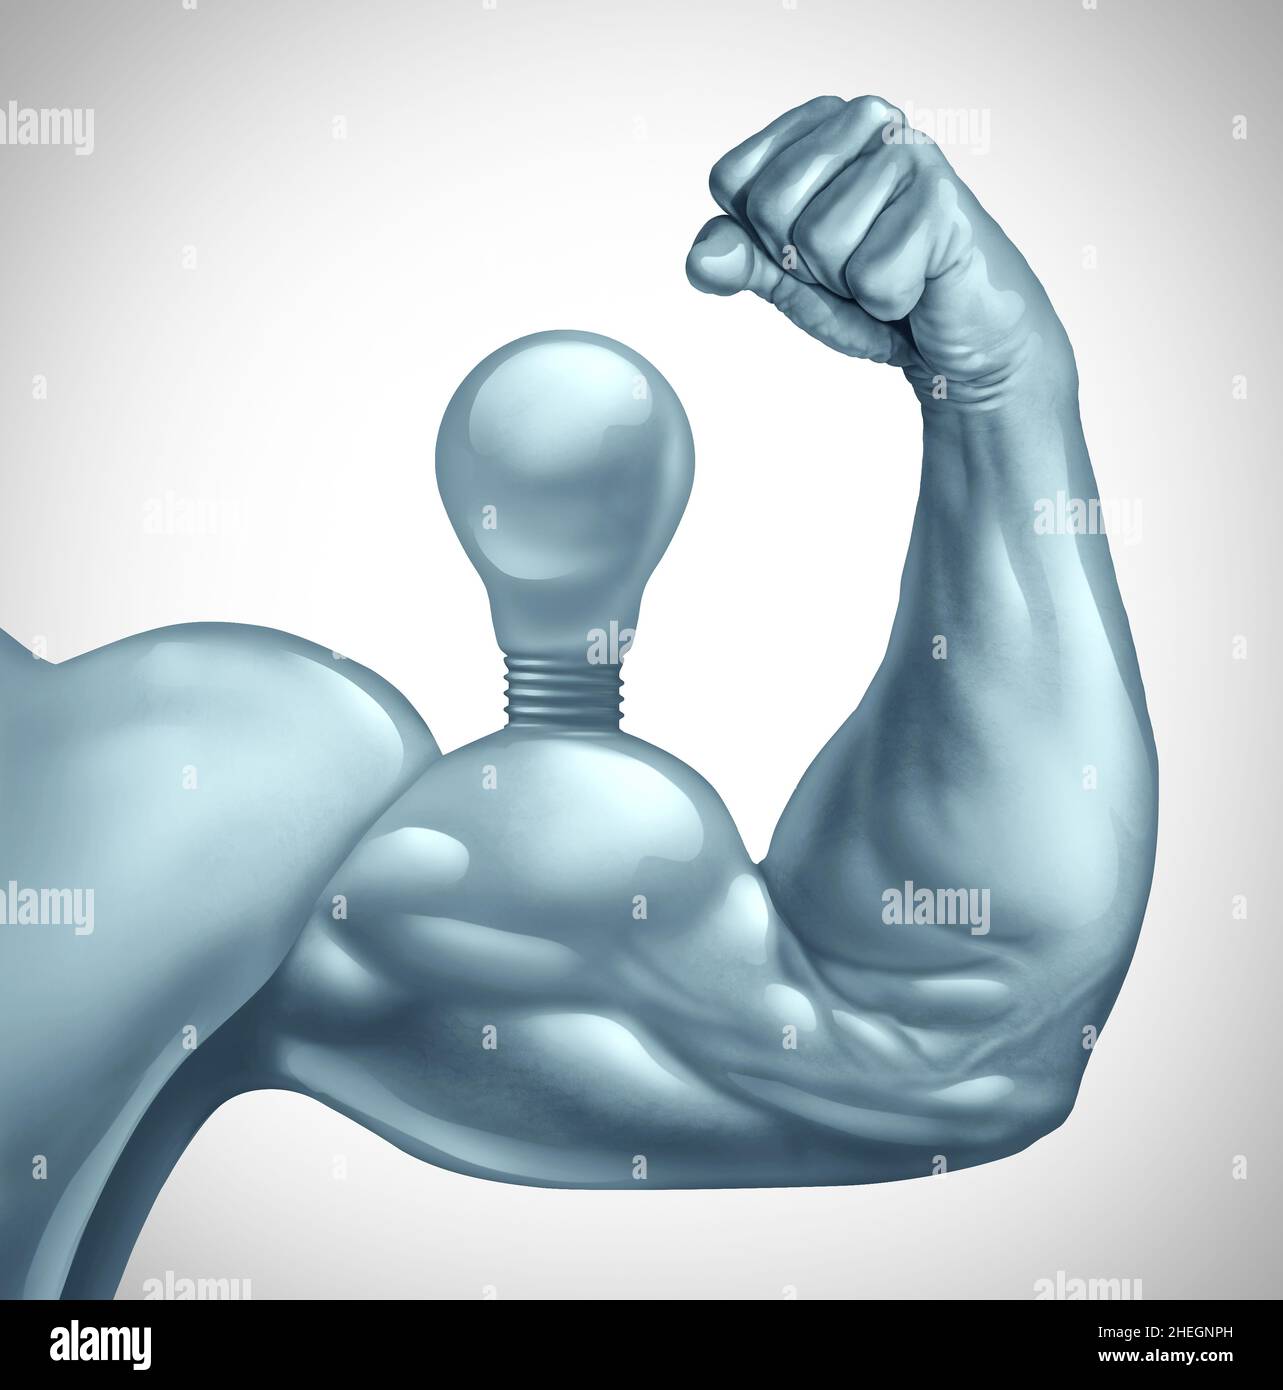 Idea of power and Powerful strong creative ideas metaphor and business creativity strength as a light bulb or lightbulb with muscles as a symbol. Stock Photo